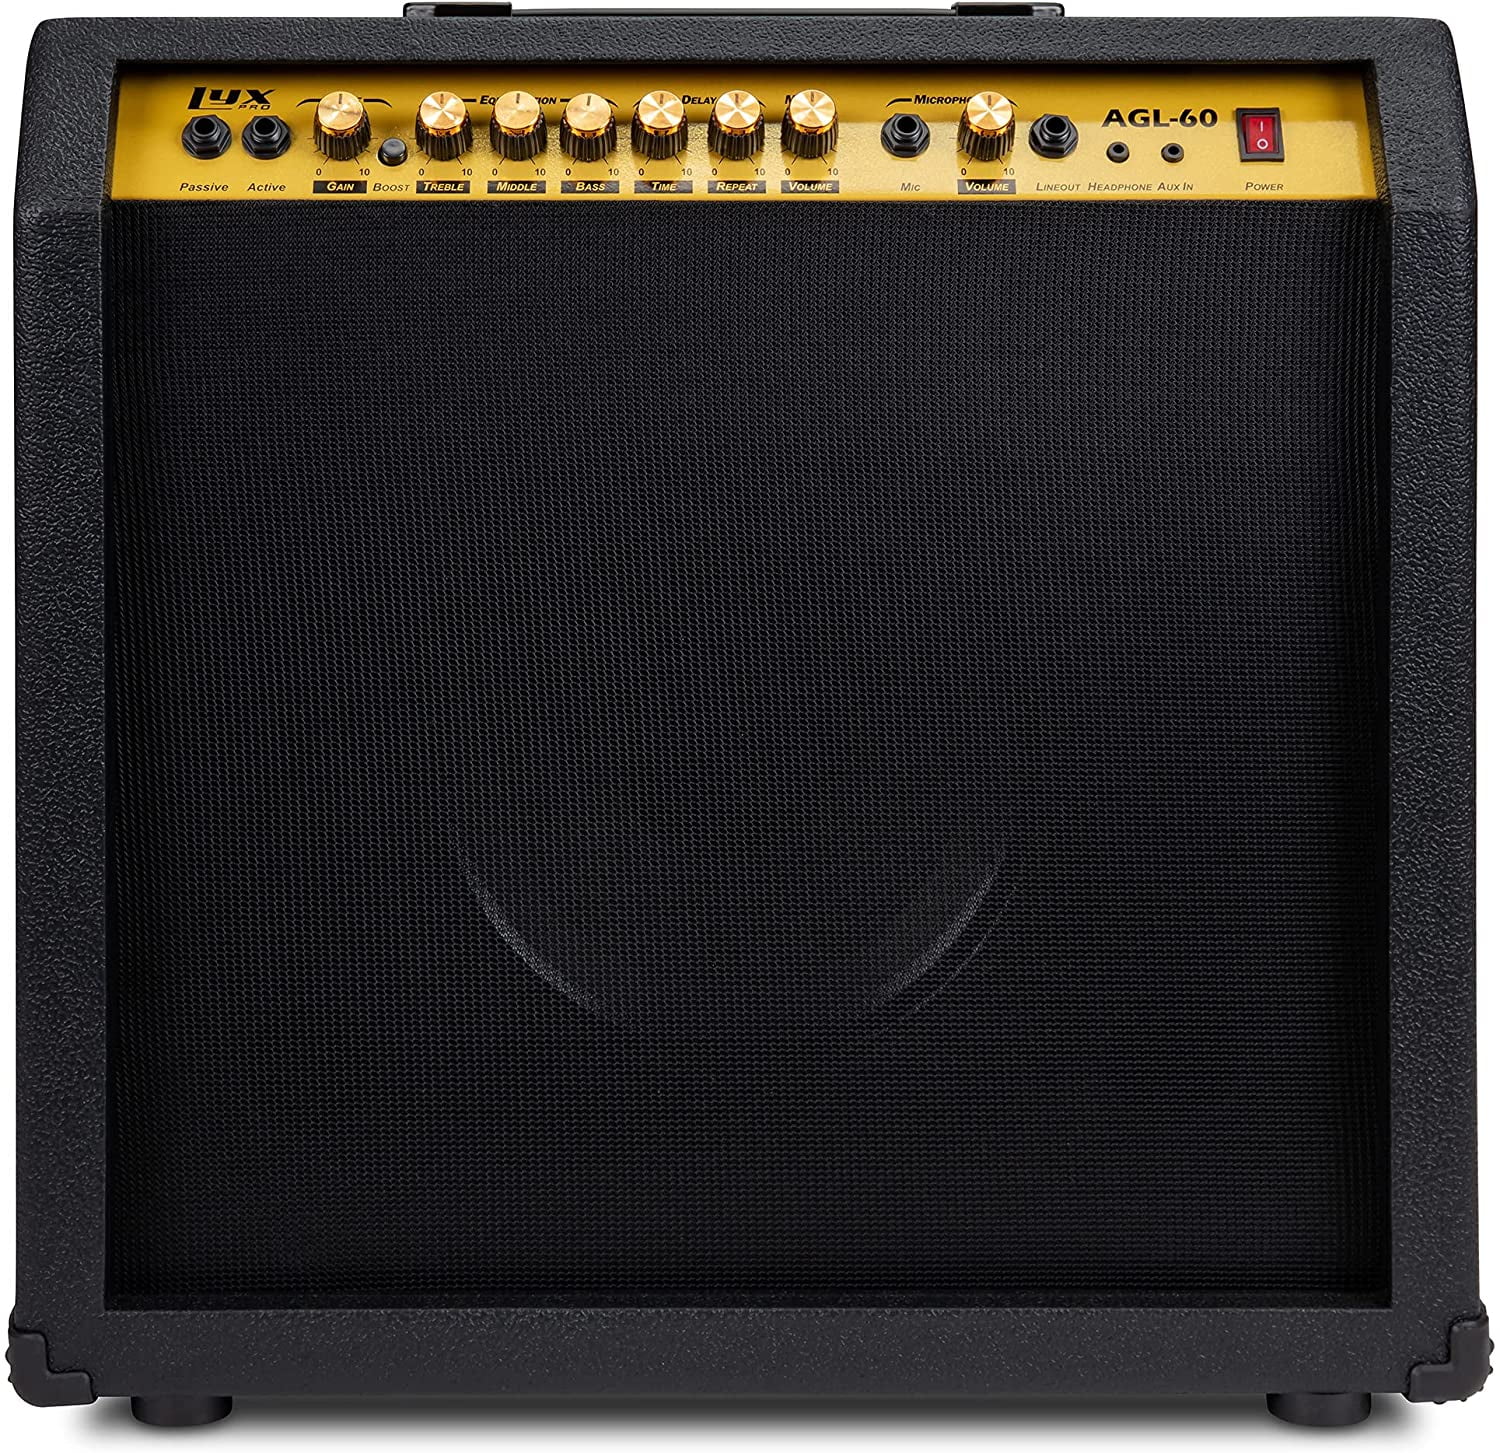 Black LyxPro Electric Guitar Amp 20 Watt Amplifier Built In Speaker Headphone Jack And Aux Input Includes Gain Bass Treble Volume And Grind 